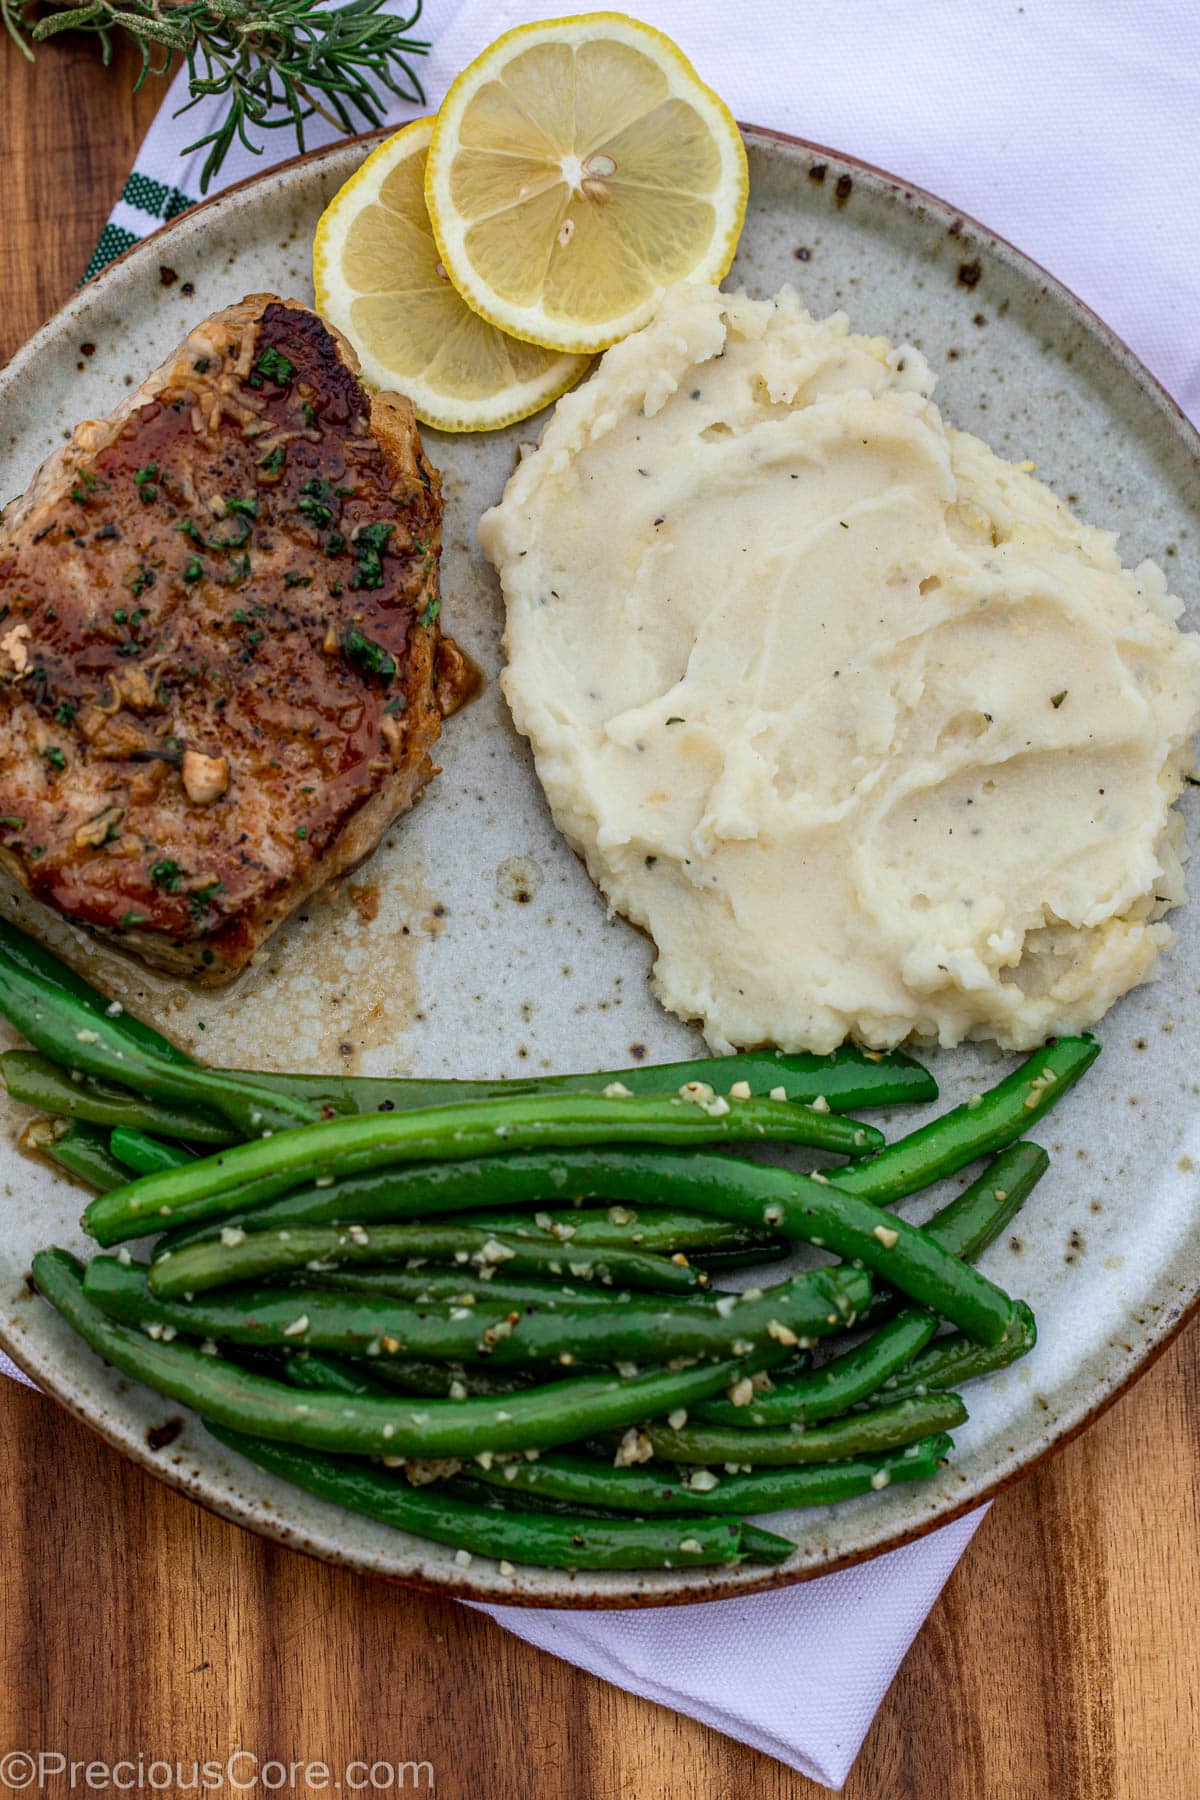 Cooked pork chops in a pan with green beans and mashed potatoes.